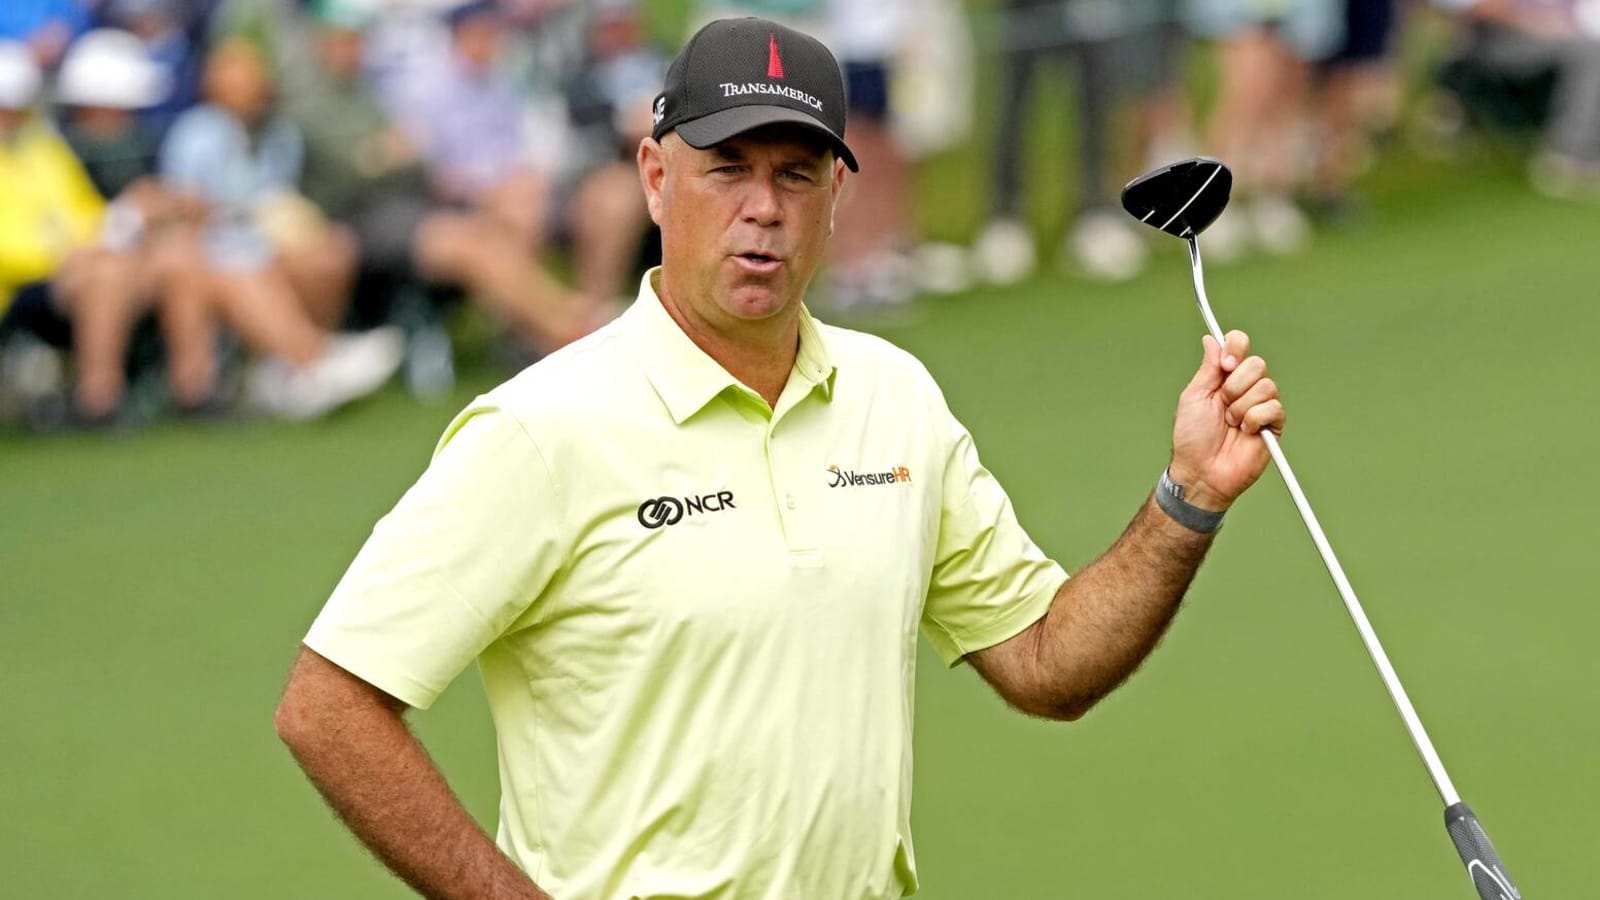 Stewart Cink sinks hole-in-one on 16th at Masters